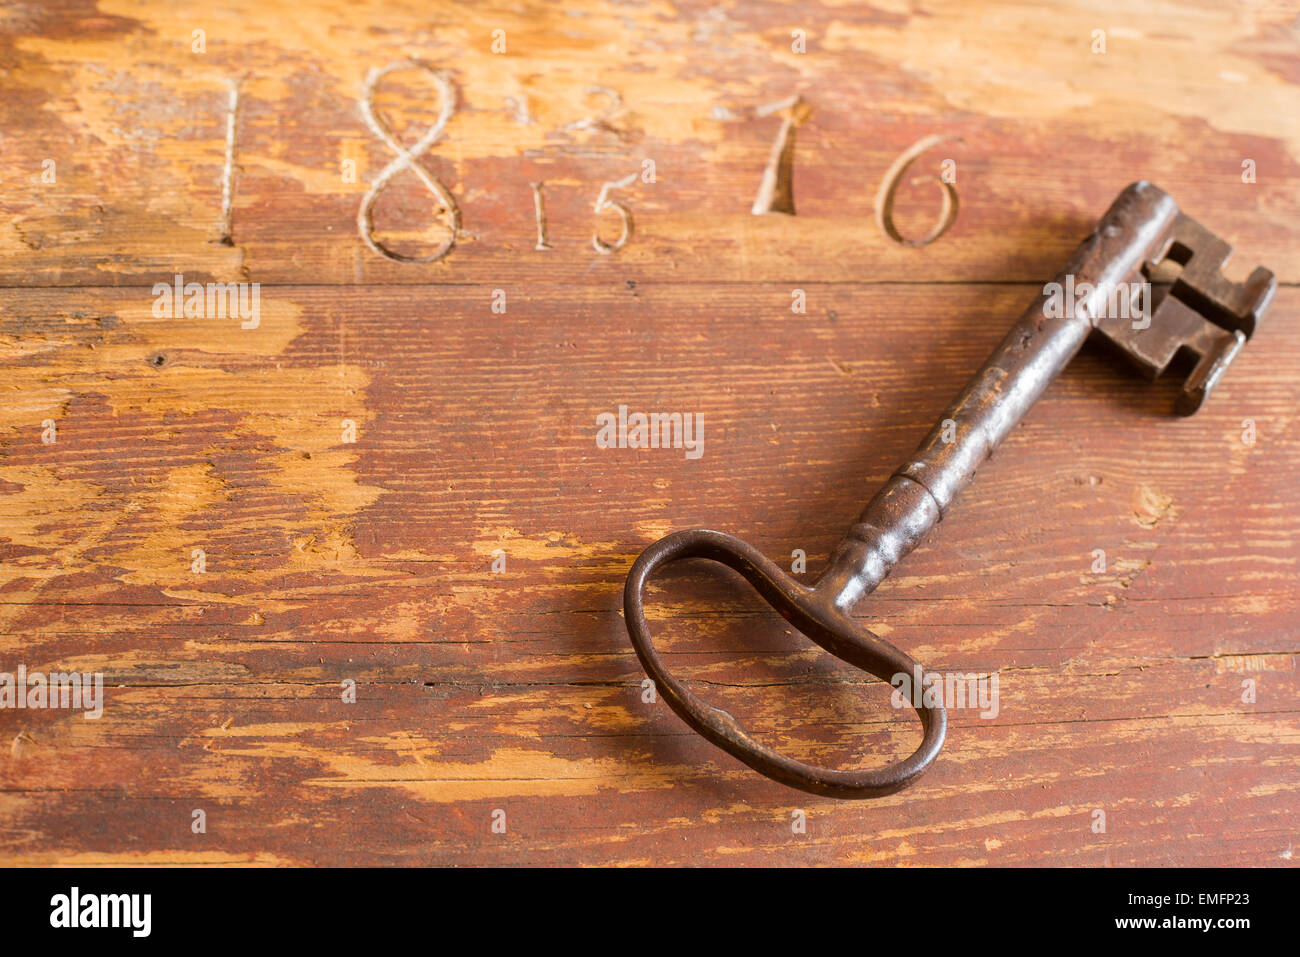 Old key on carved wooden table Stock Photo